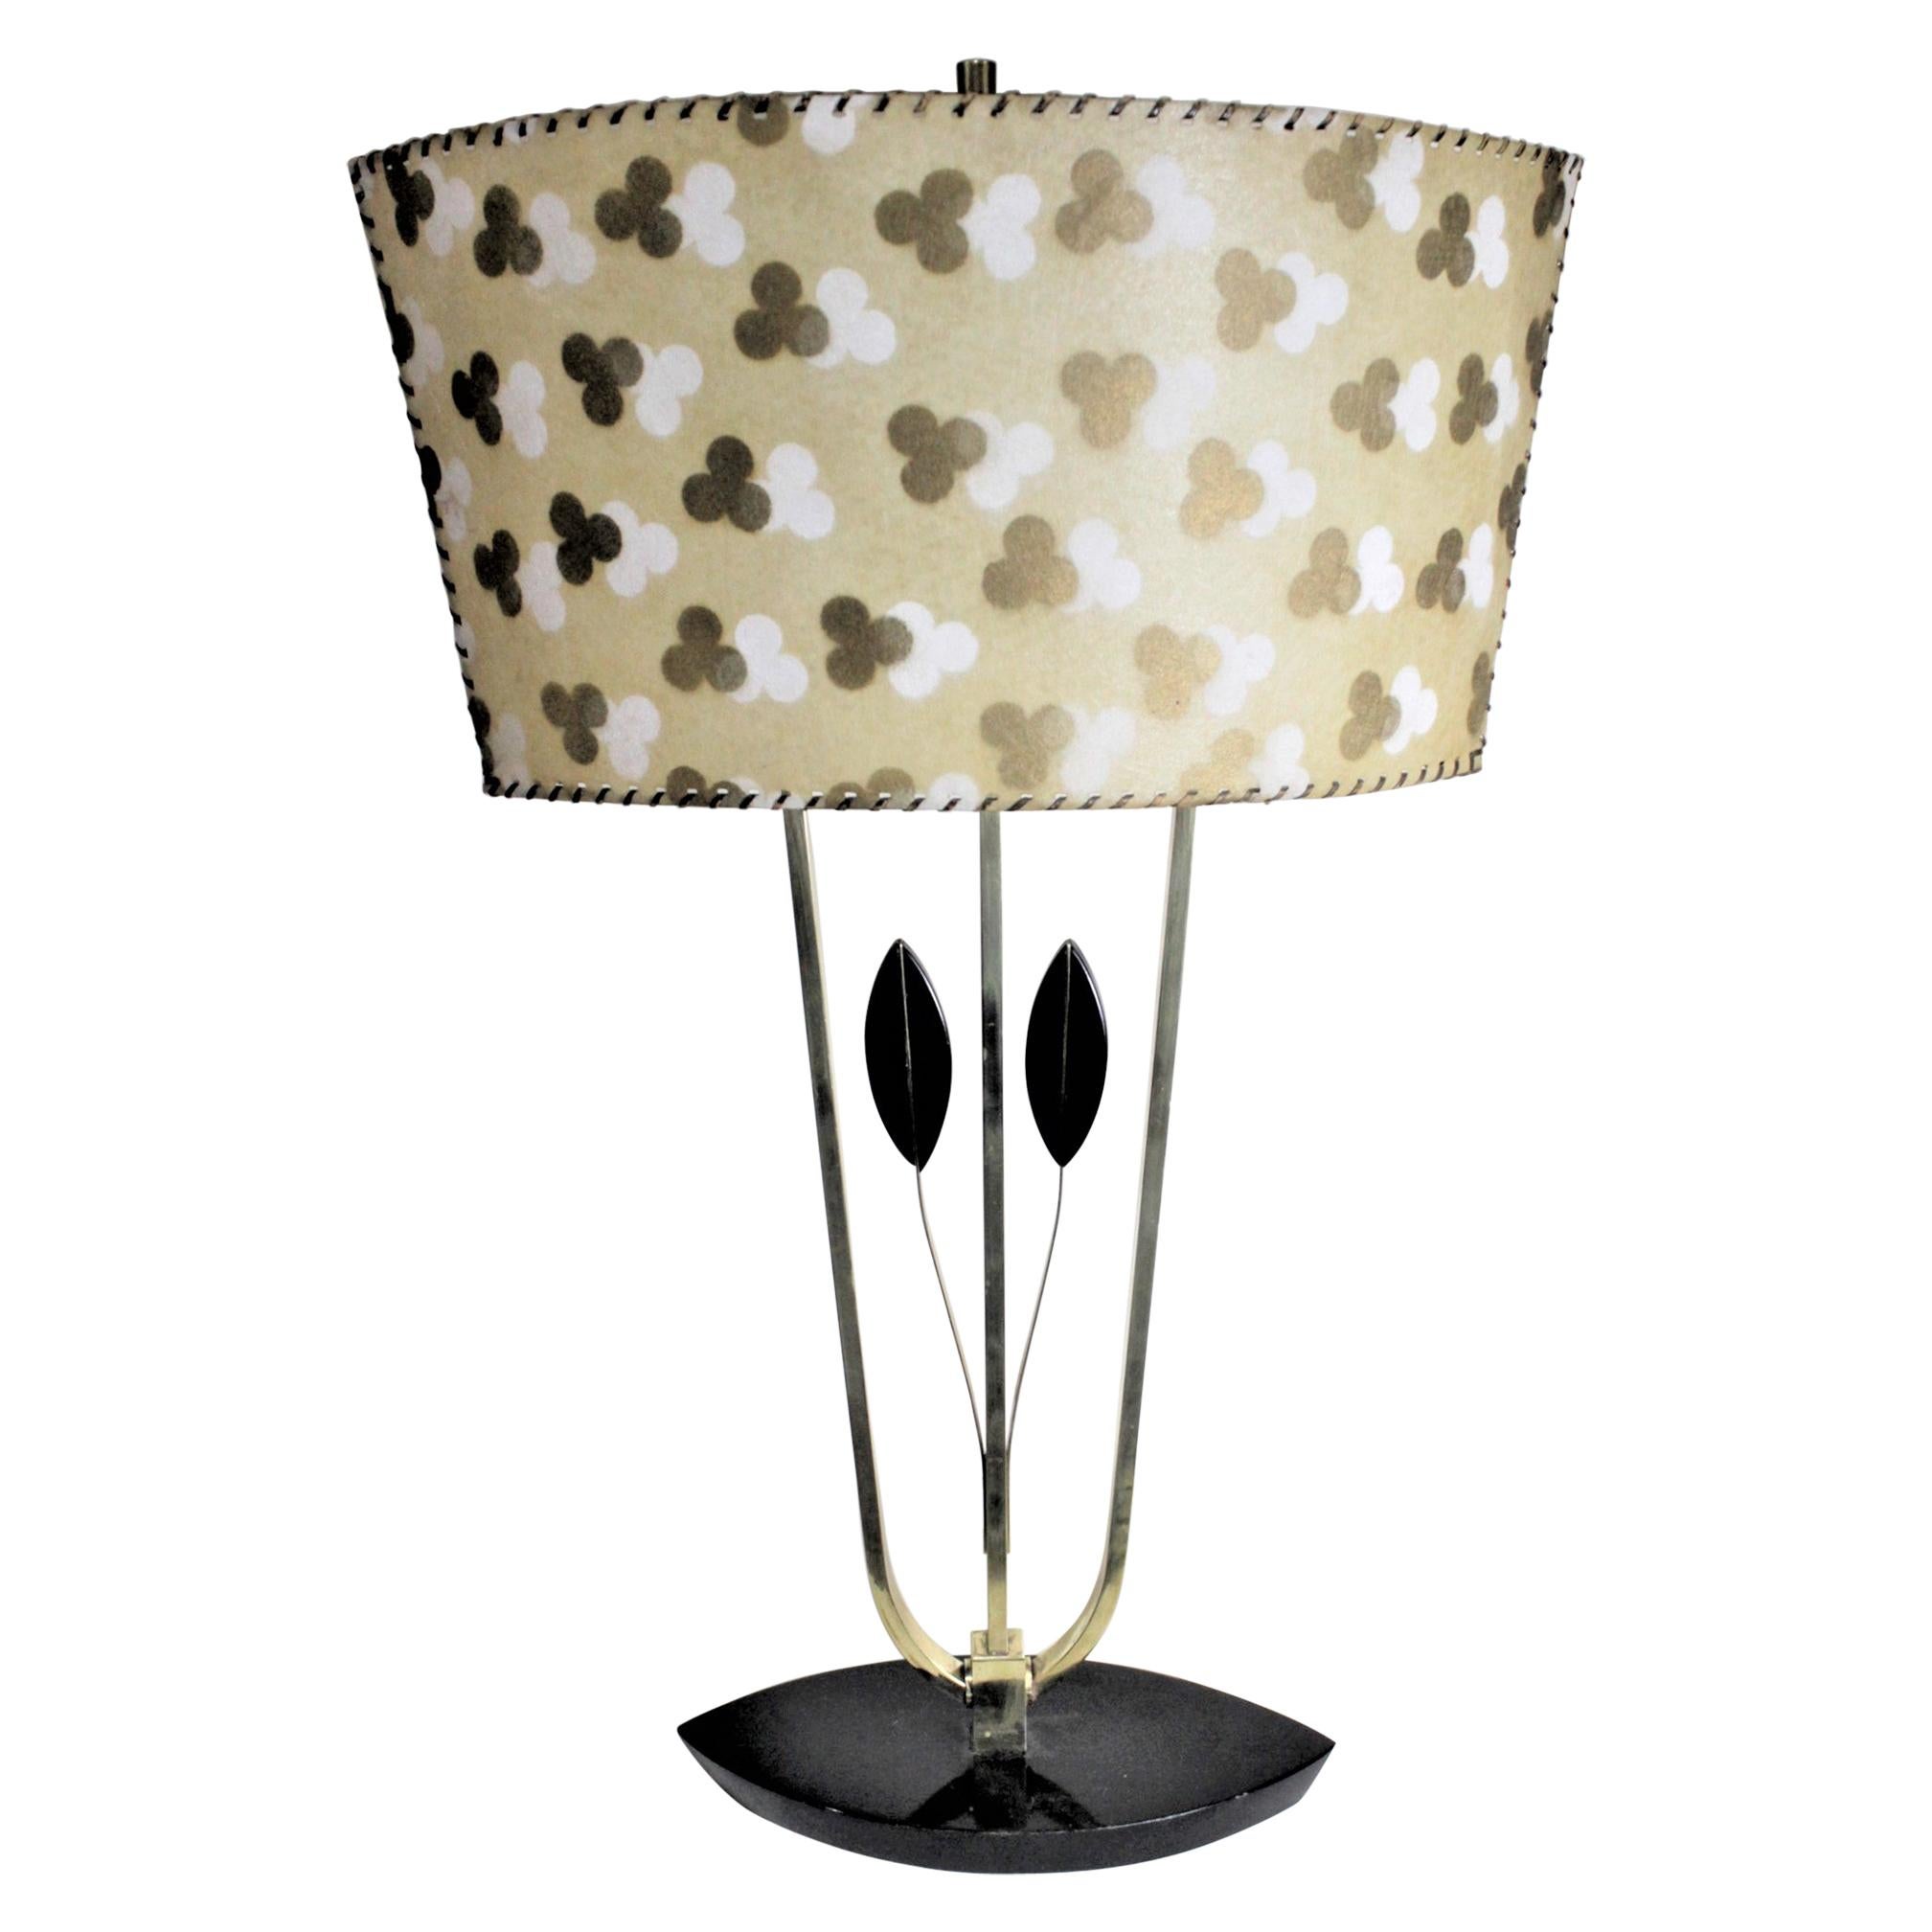 Mid-Century Modern Rembrandt Styled Table Lamp with Patterned Fiberene Shade